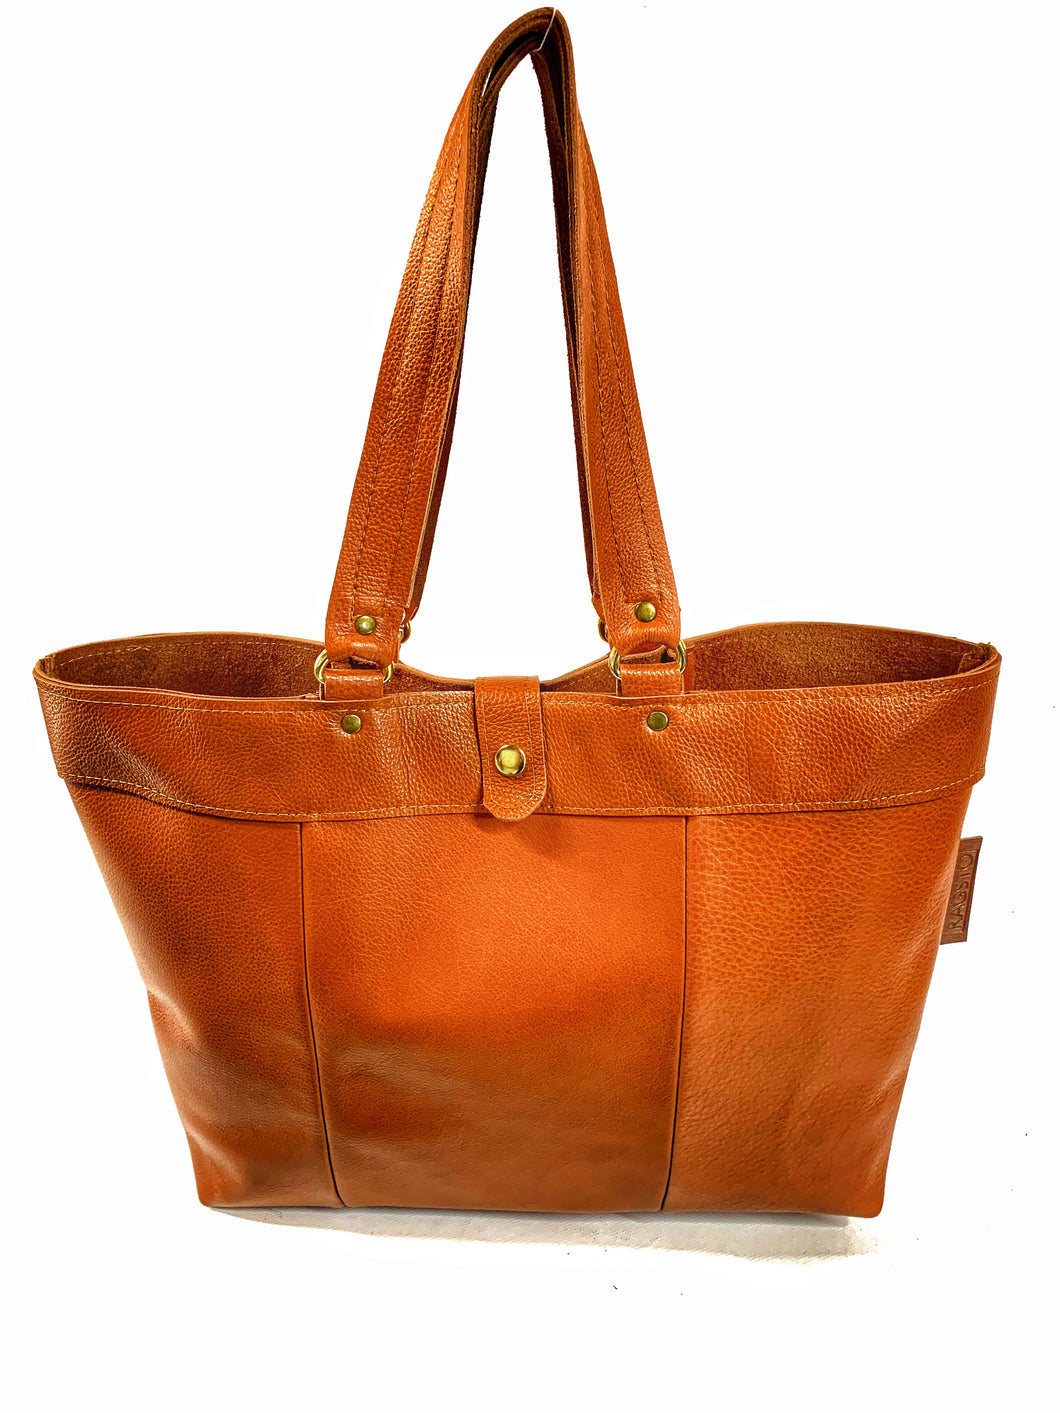 Upcycled Tan Leather Tote Shopper